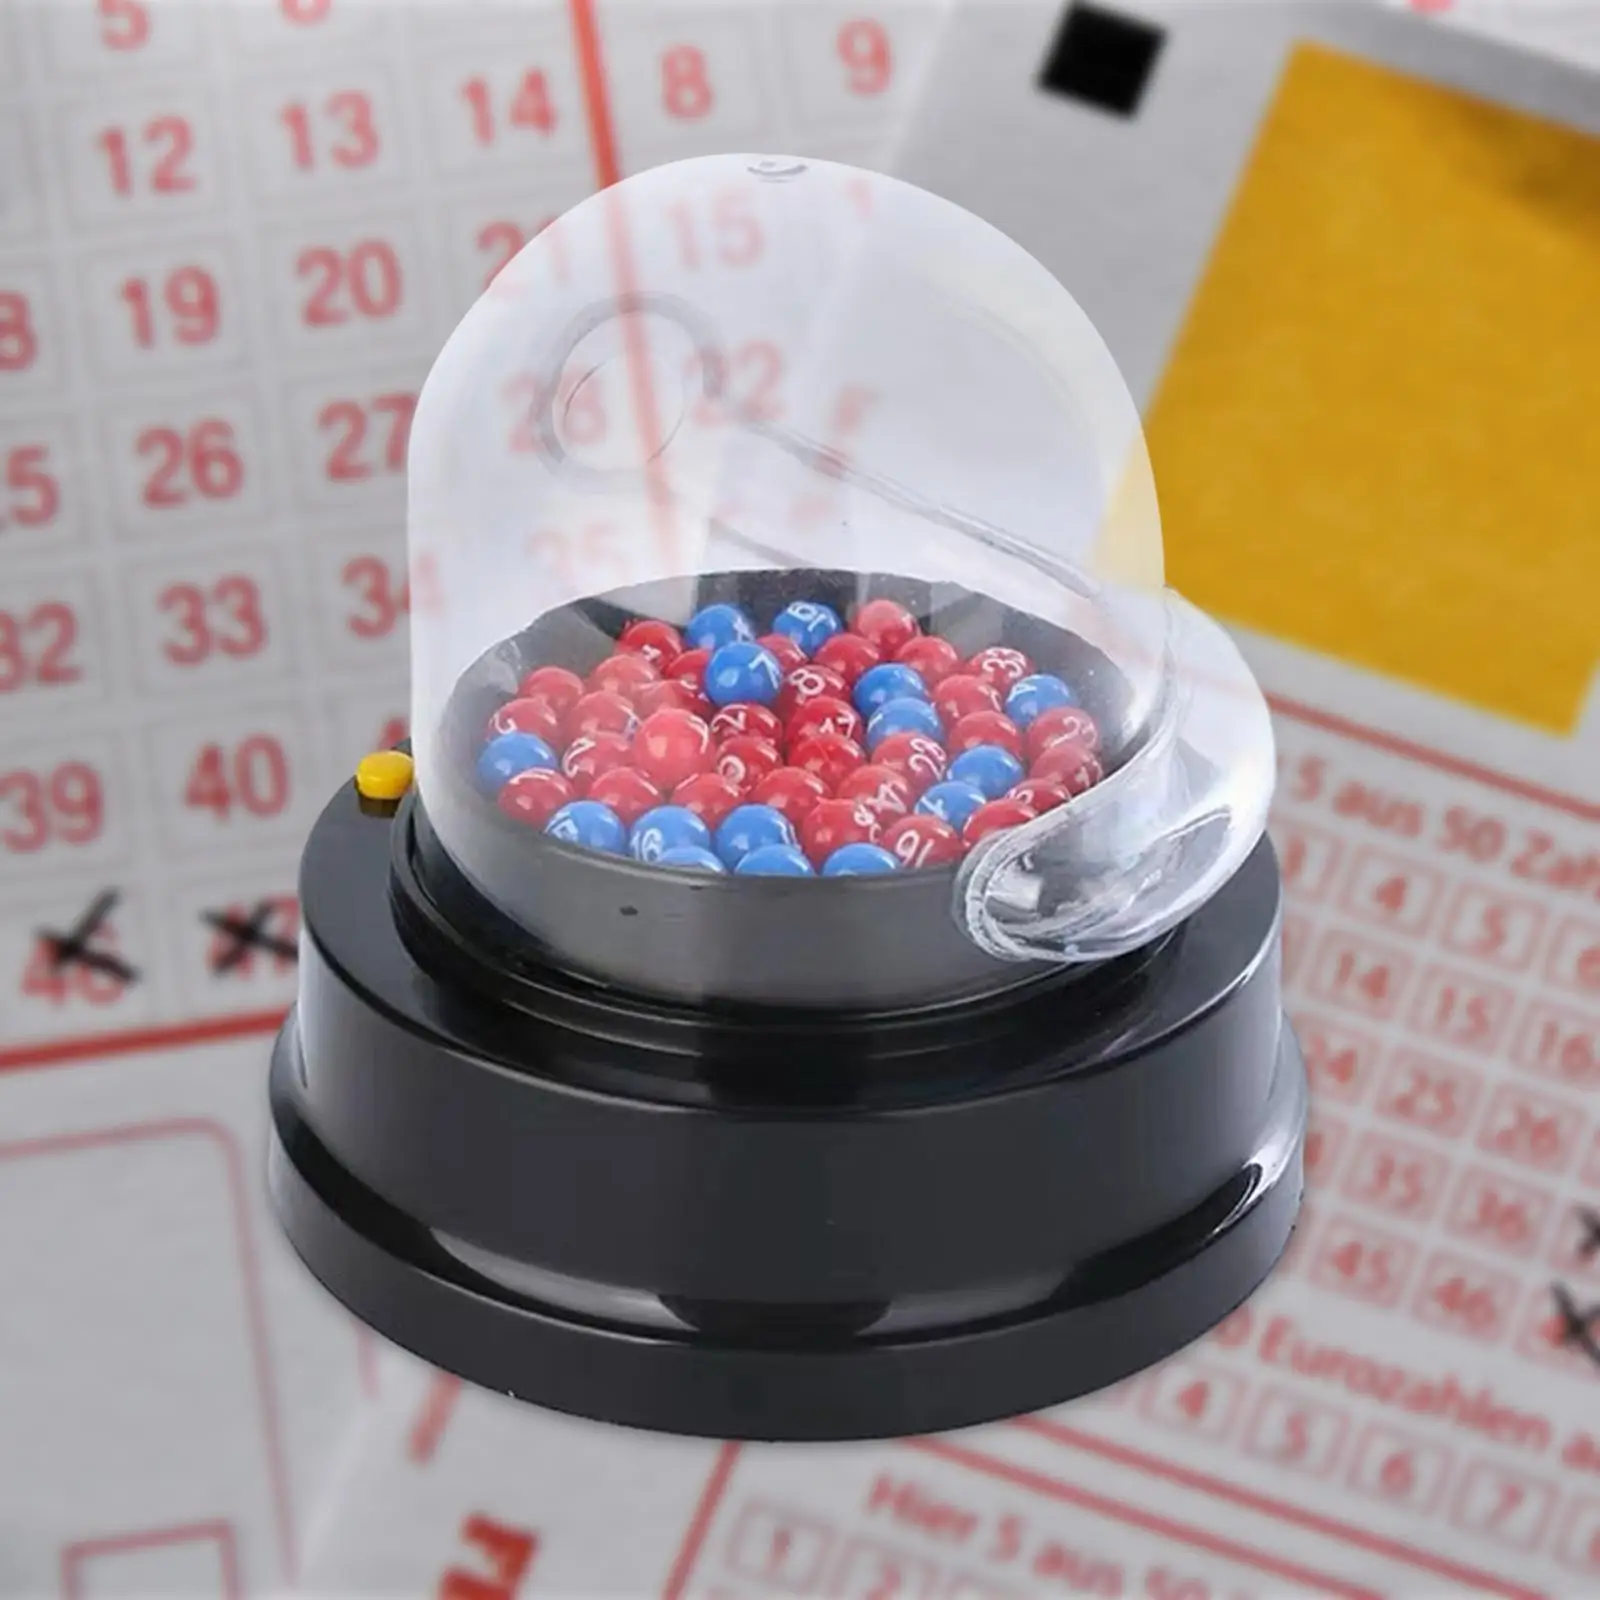 Lucky Numbers Game Children Toys Bingo Machine Game with Balls for Sweepstakes Cafe Nightclub Recreational Activity Carnivals